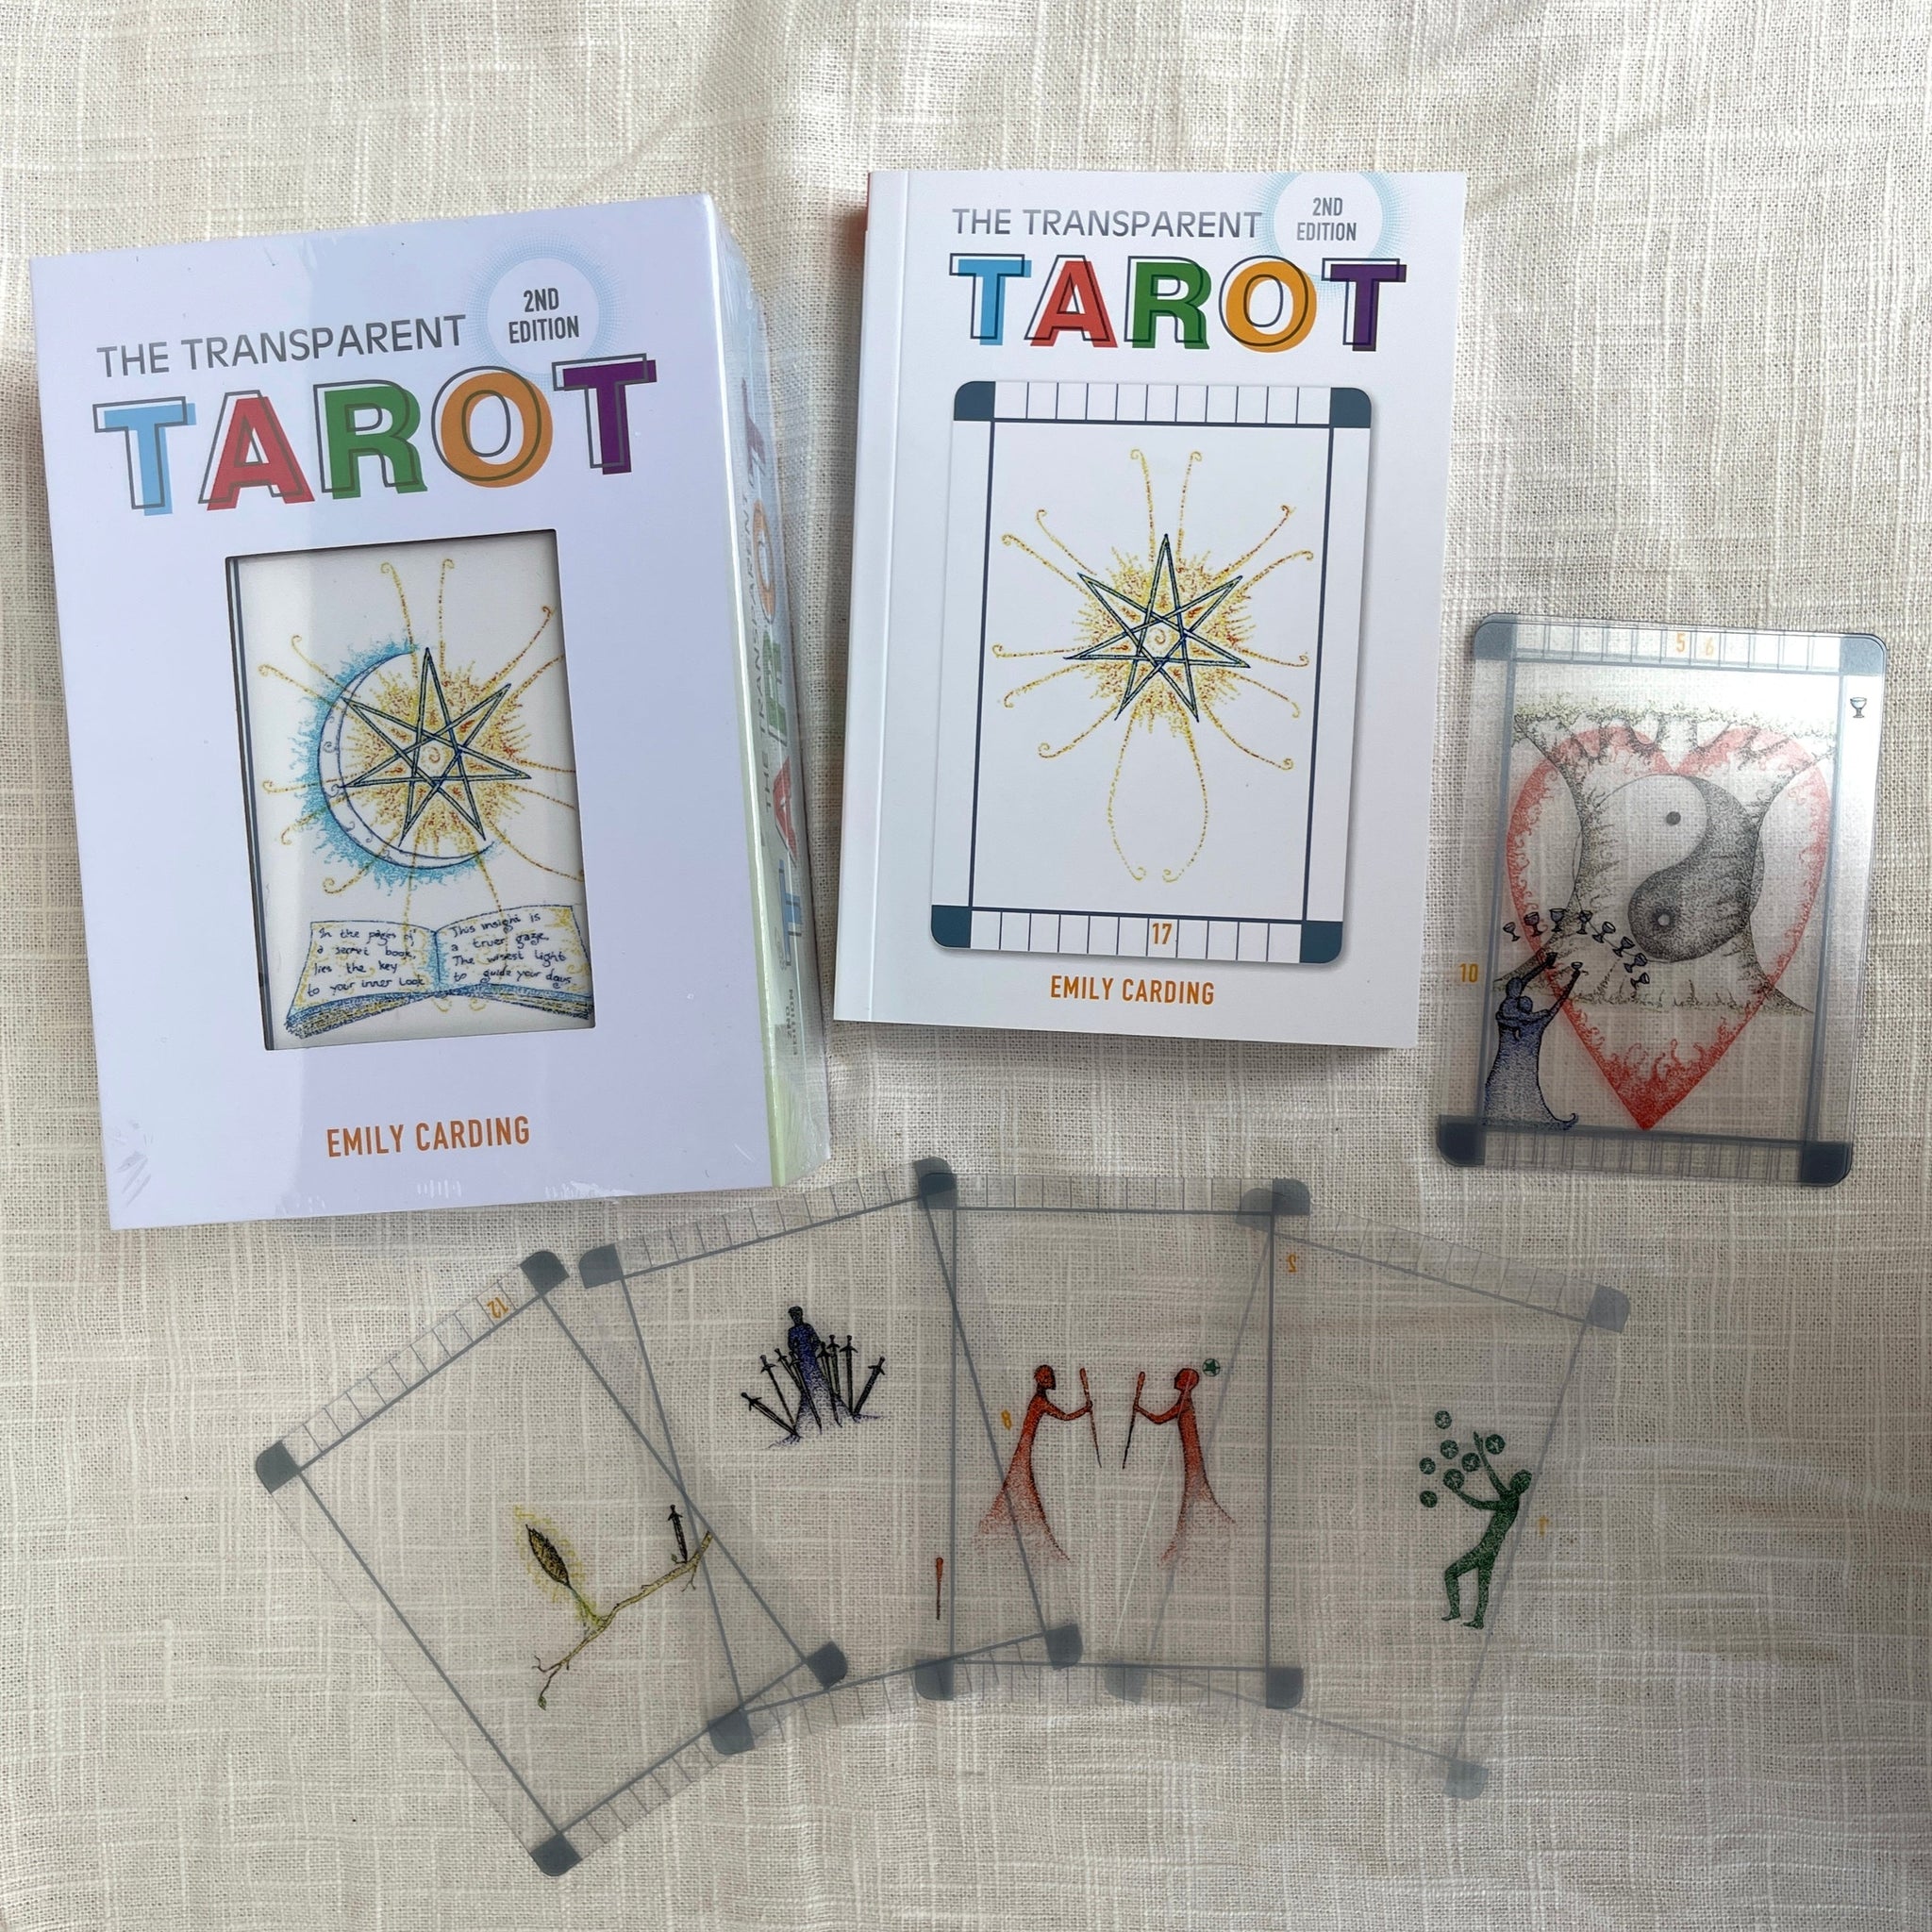 for mig Tom Audreath Forvirre Transparent Tarot – The Healing Hedge Witch